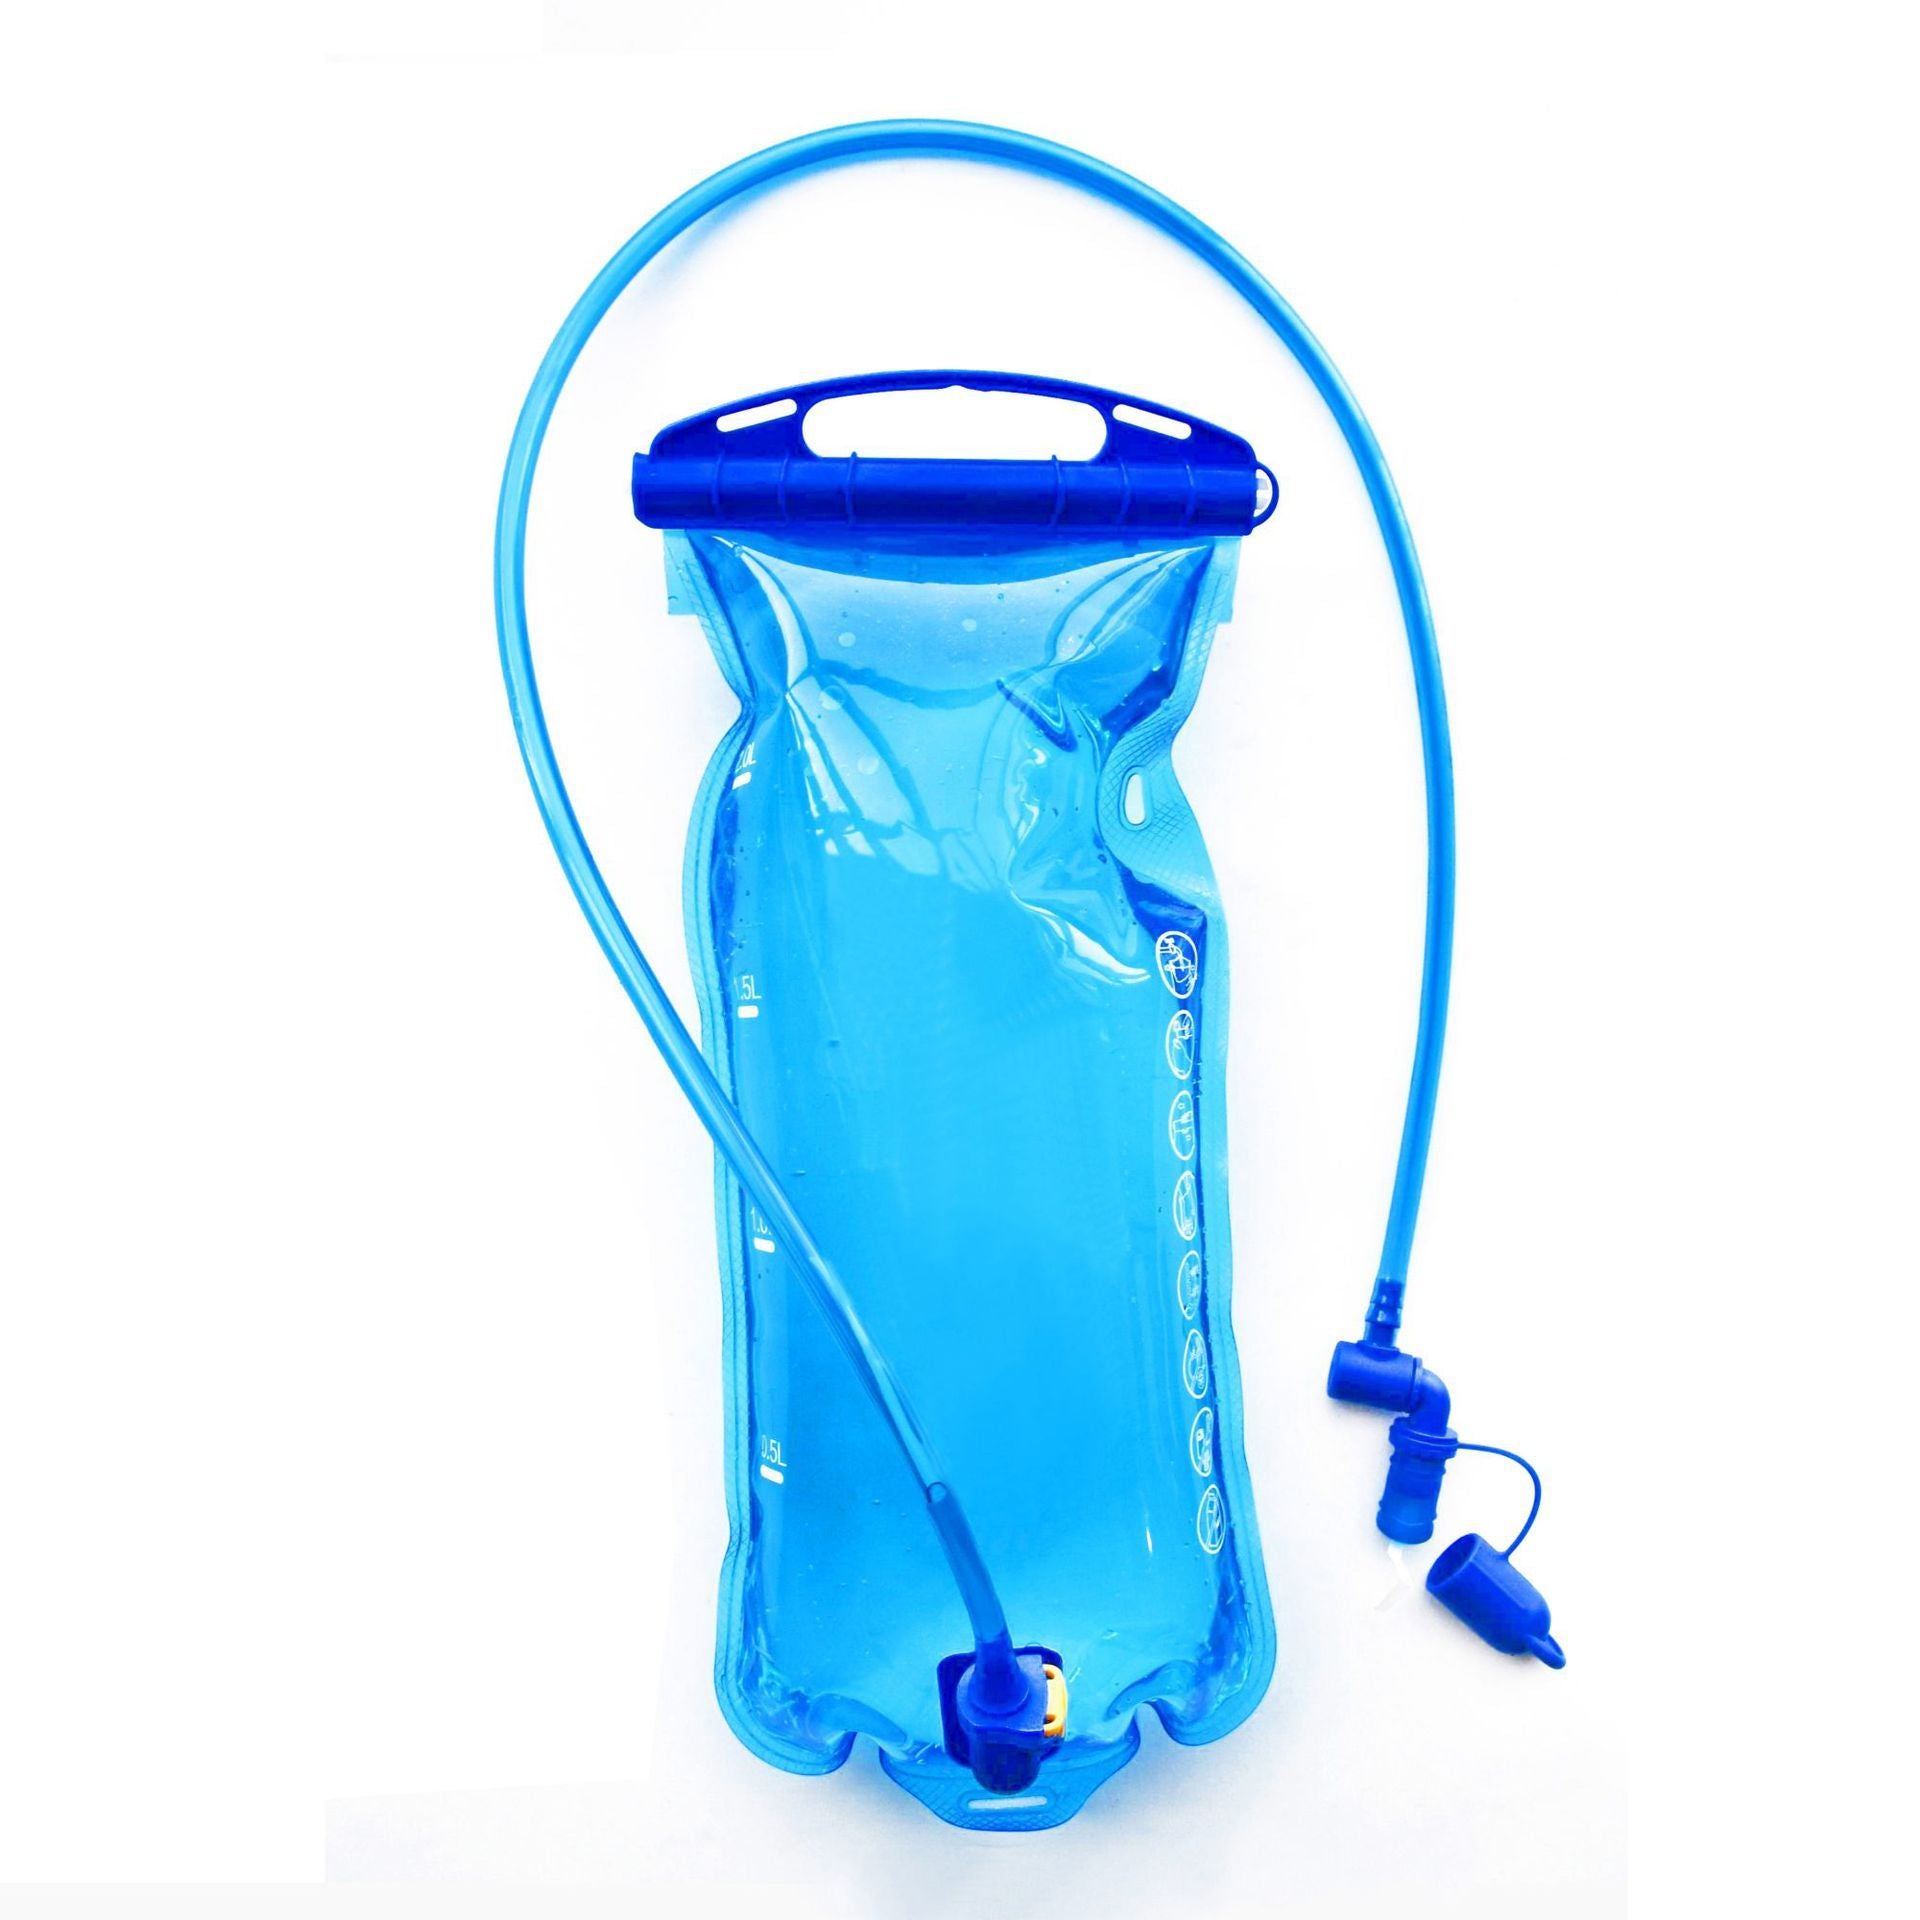 Outdoor water bag foldable water bag portable